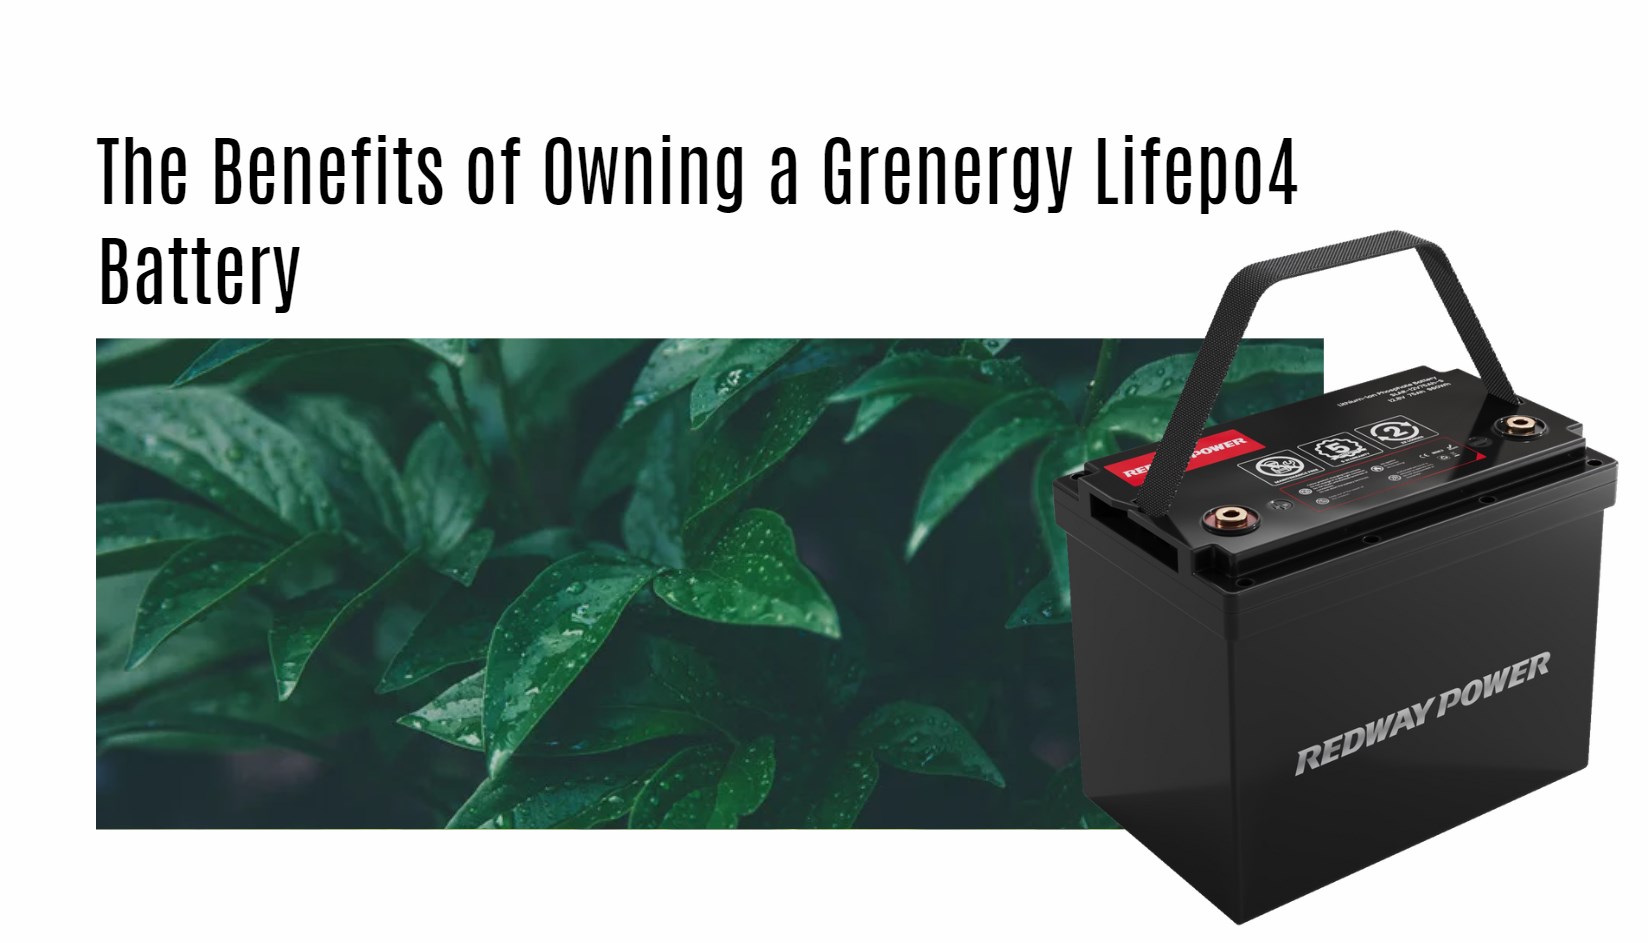 The Benefits of Owning a Grenergy Lifepo4 Battery. 12v 100ah lithium battery factory oem manufacturer